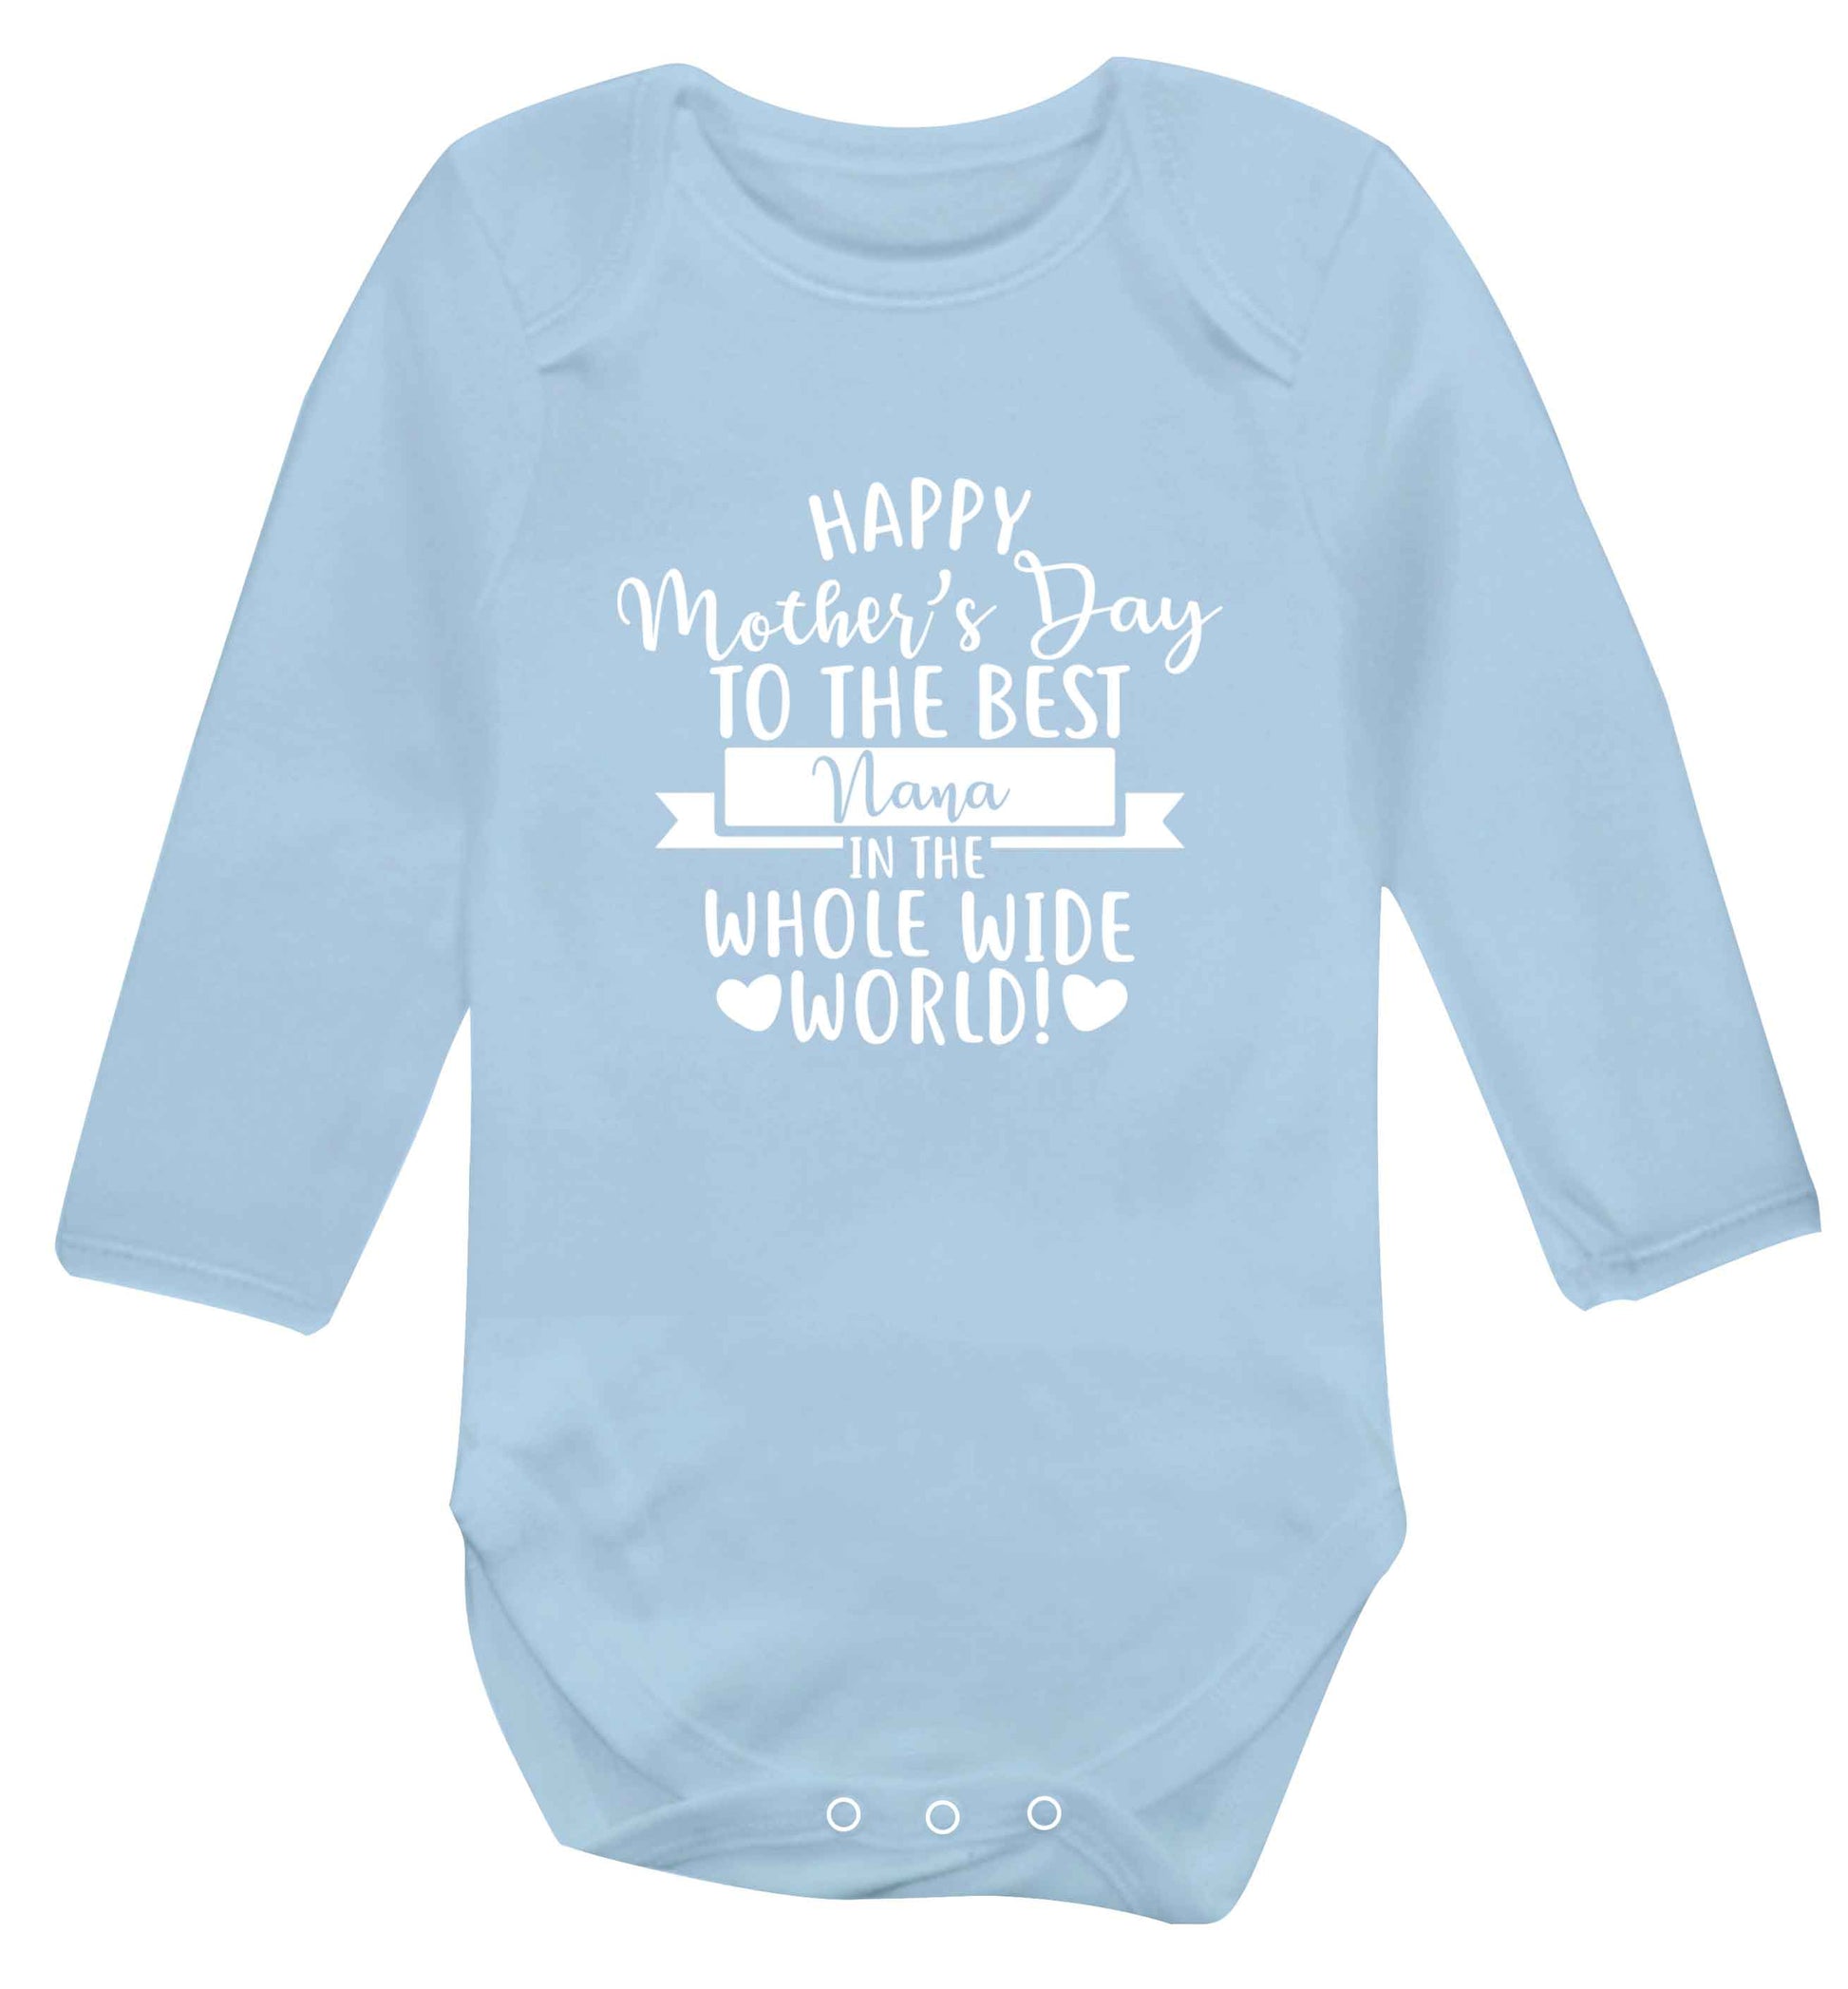 Happy mother's day to the best nana in the world baby vest long sleeved pale blue 6-12 months